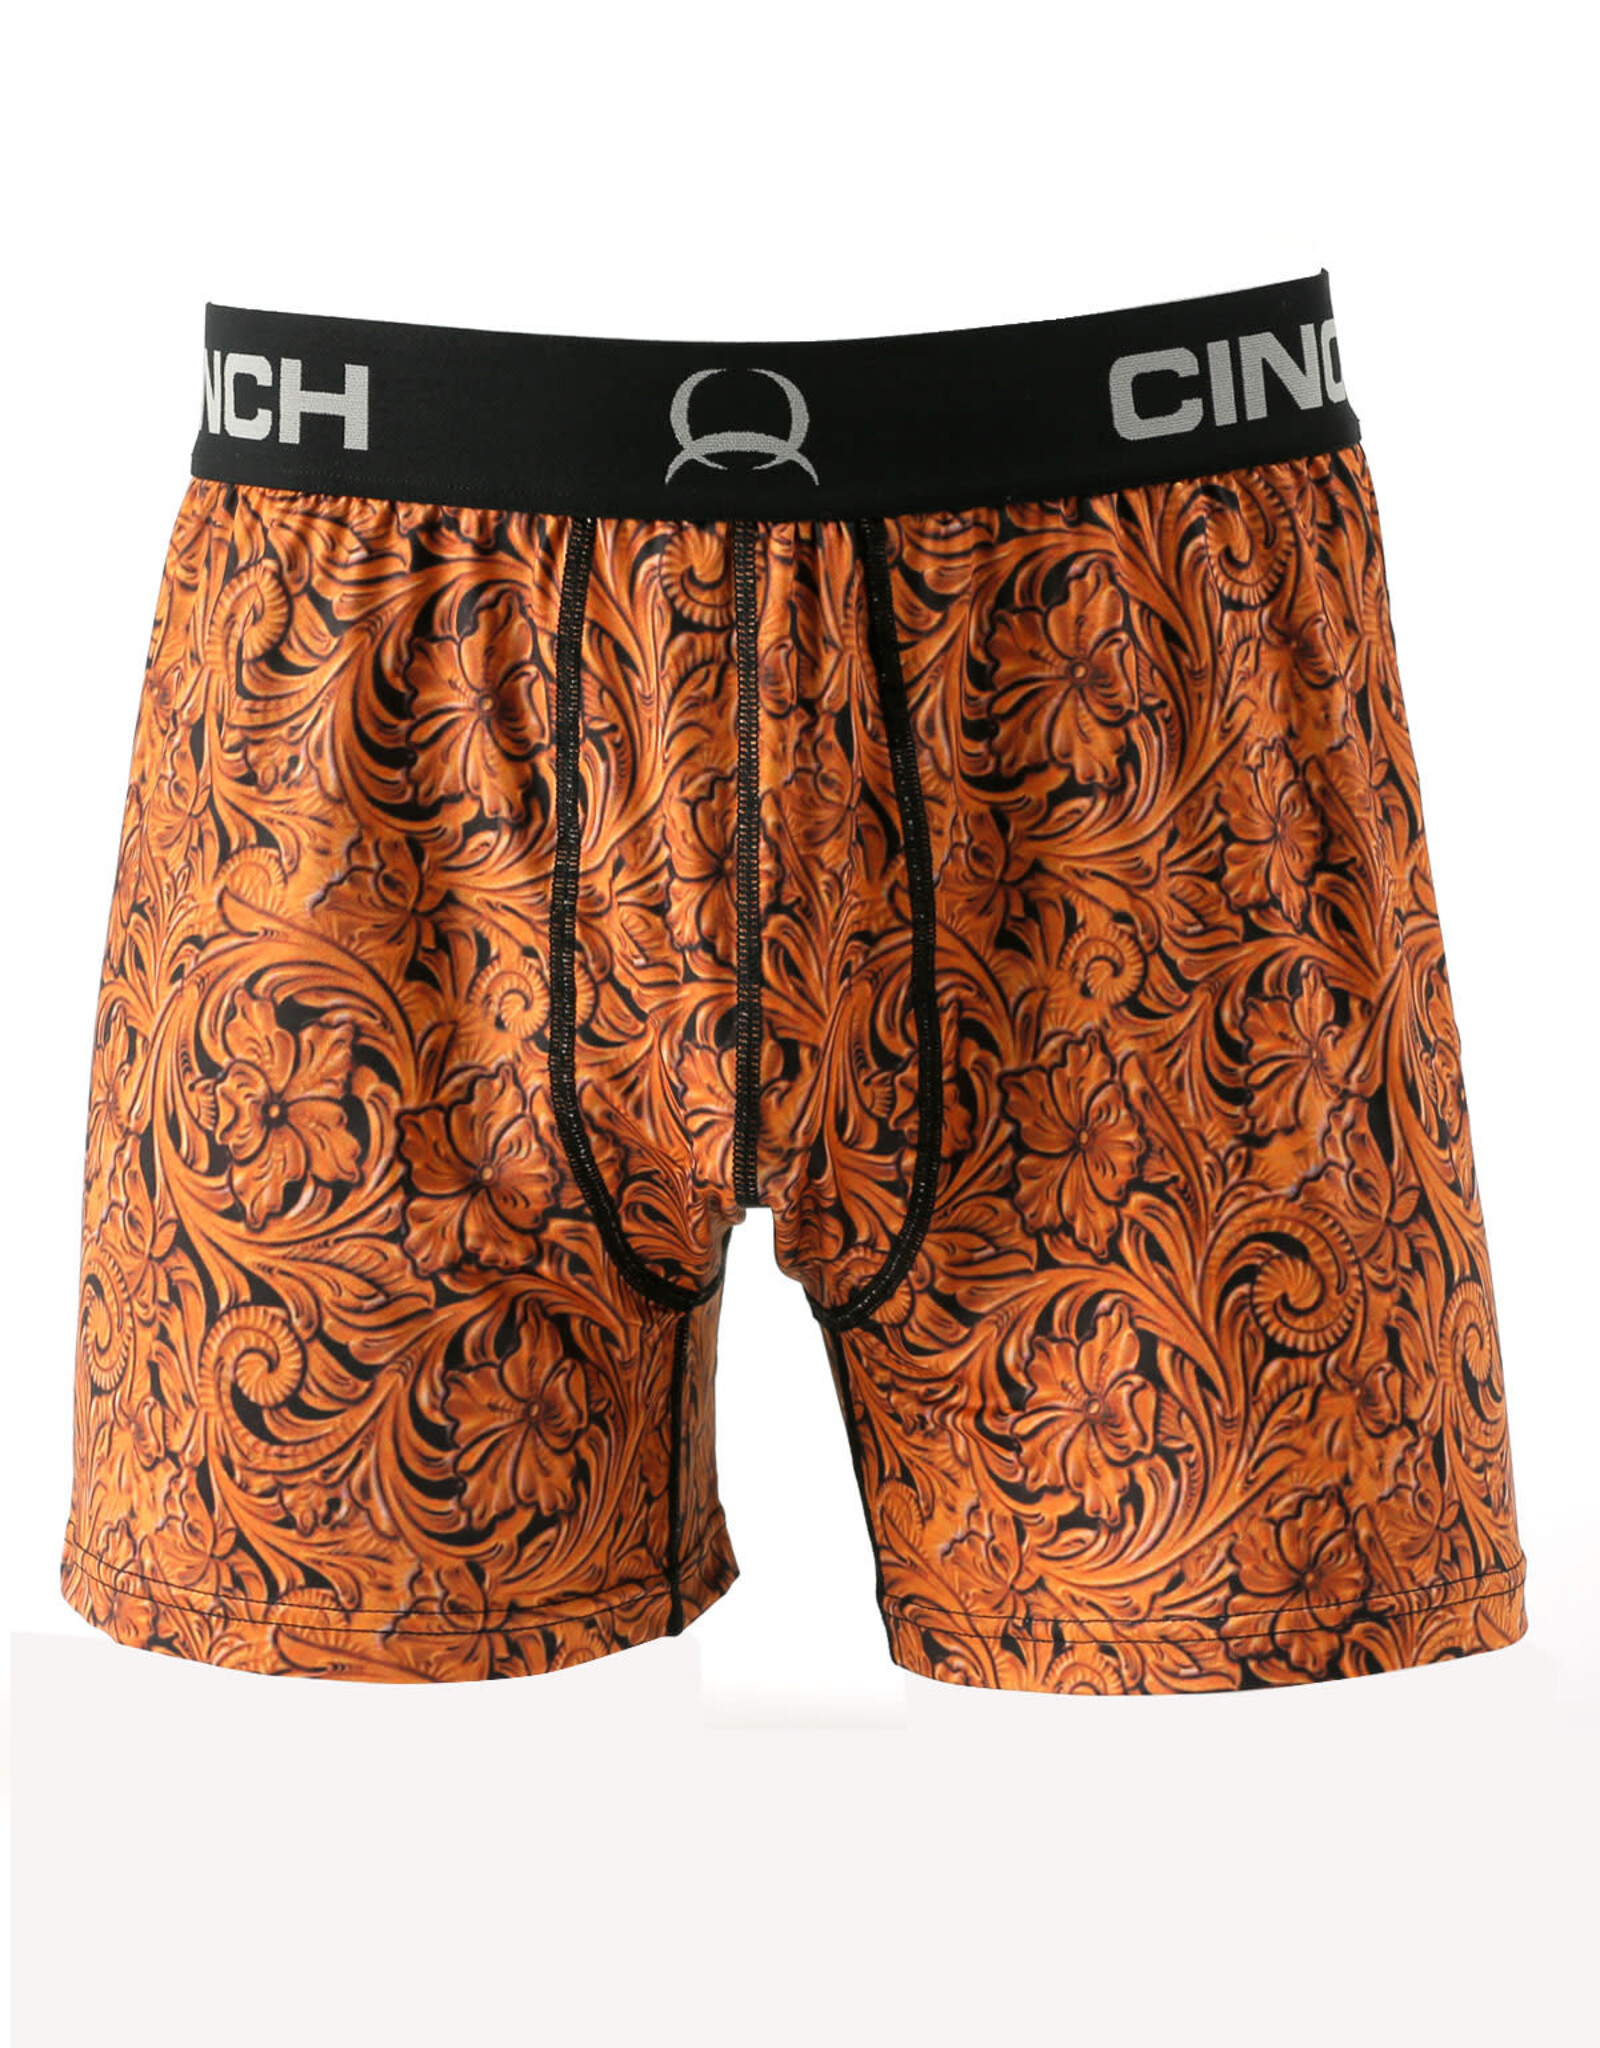 Cinch Mens Cinch Loose Fit  Boxer Briefs 5" Tooled Leather Look